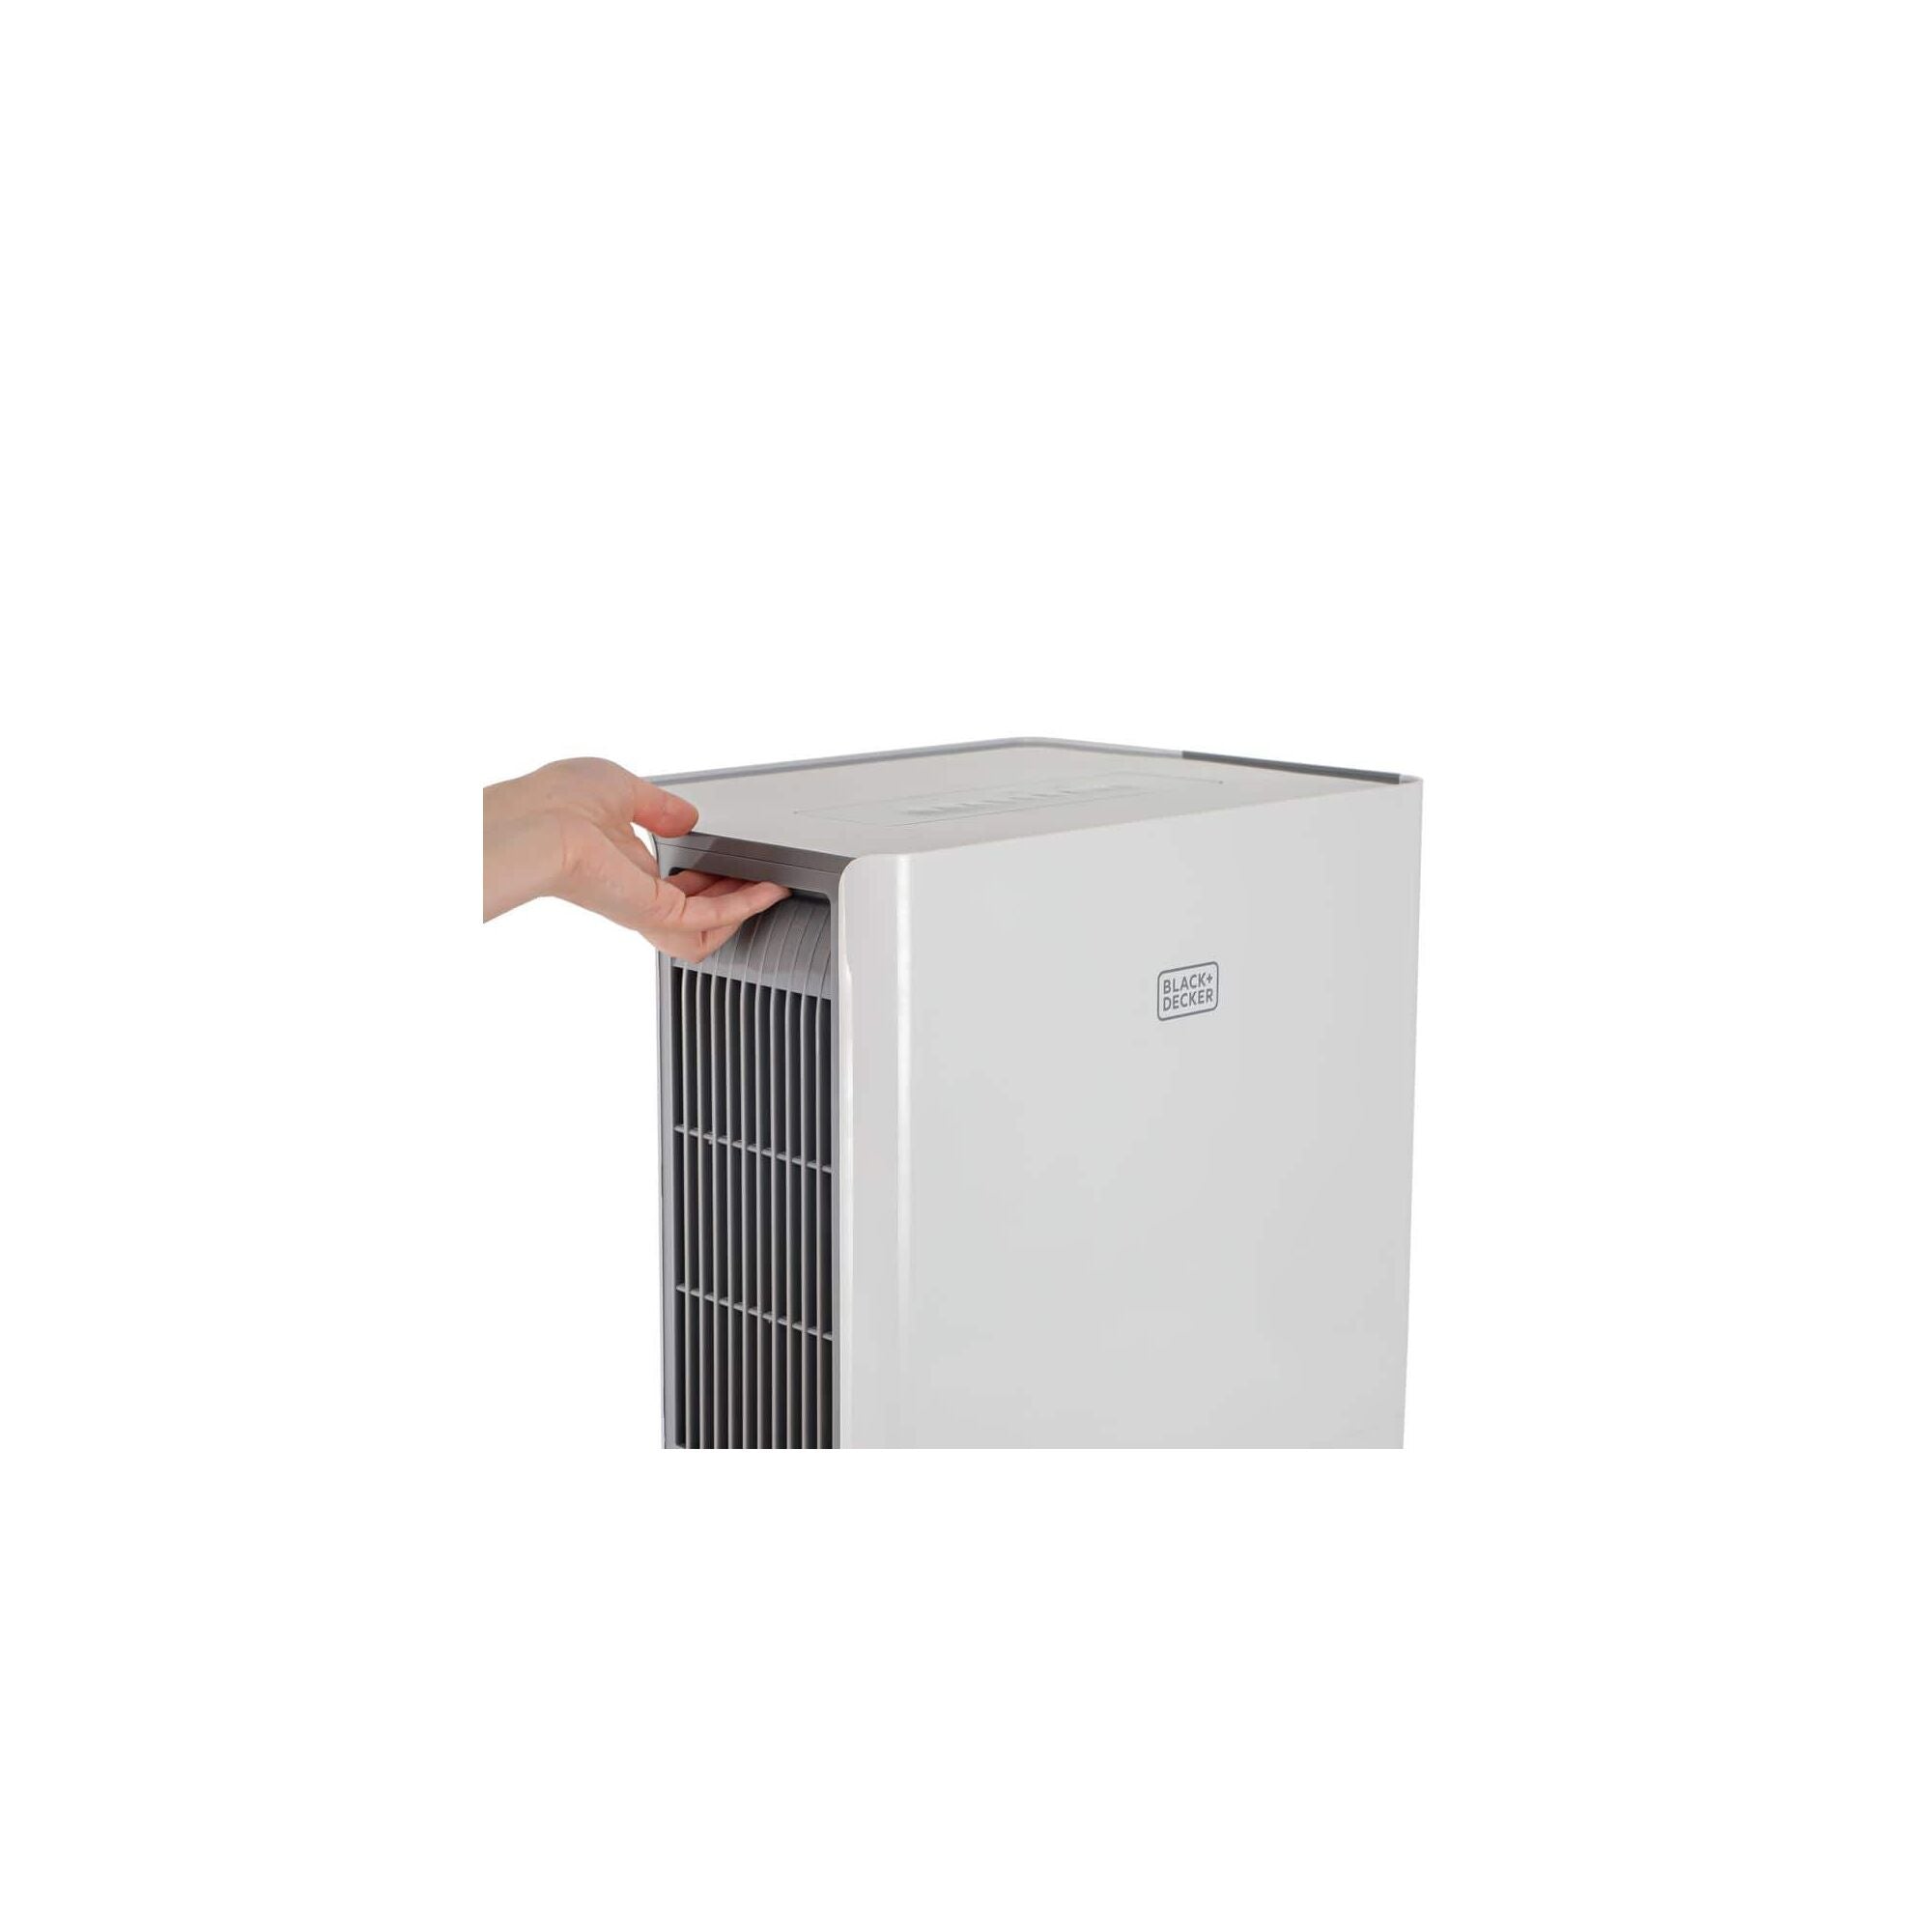 Sold at Auction: BLACK+DECKER 4500 SQ. FT. DEHUMIDIFIER FOR EXTRA